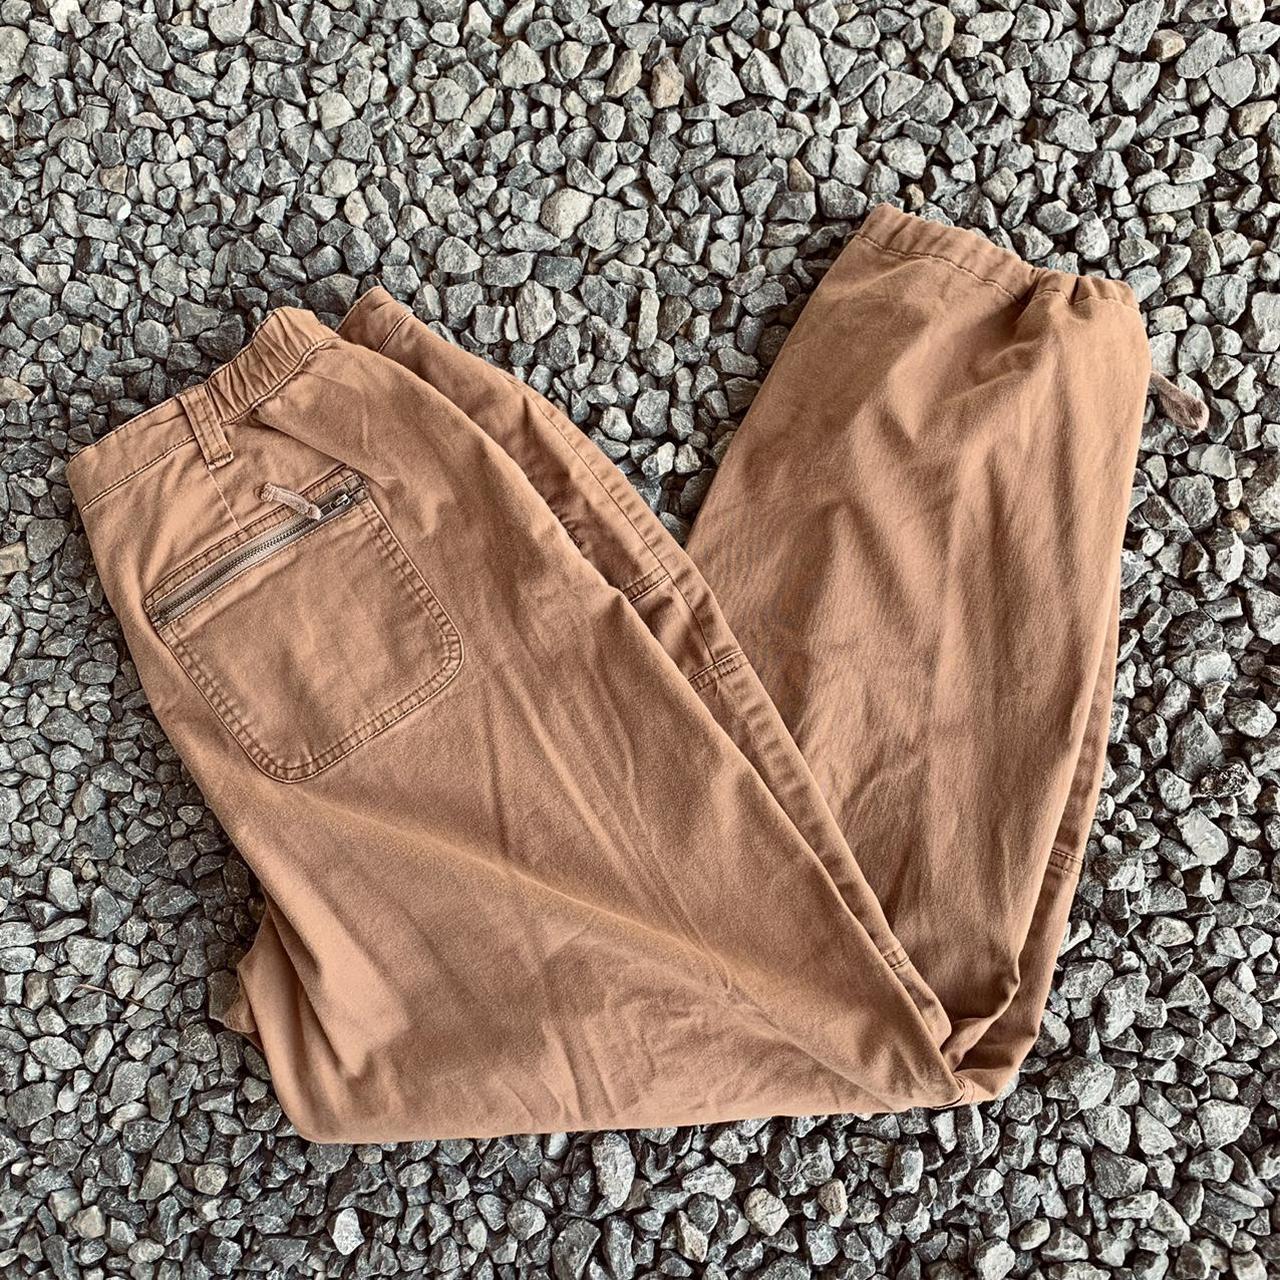 Product Image 4 - Brown colored cargo pants with